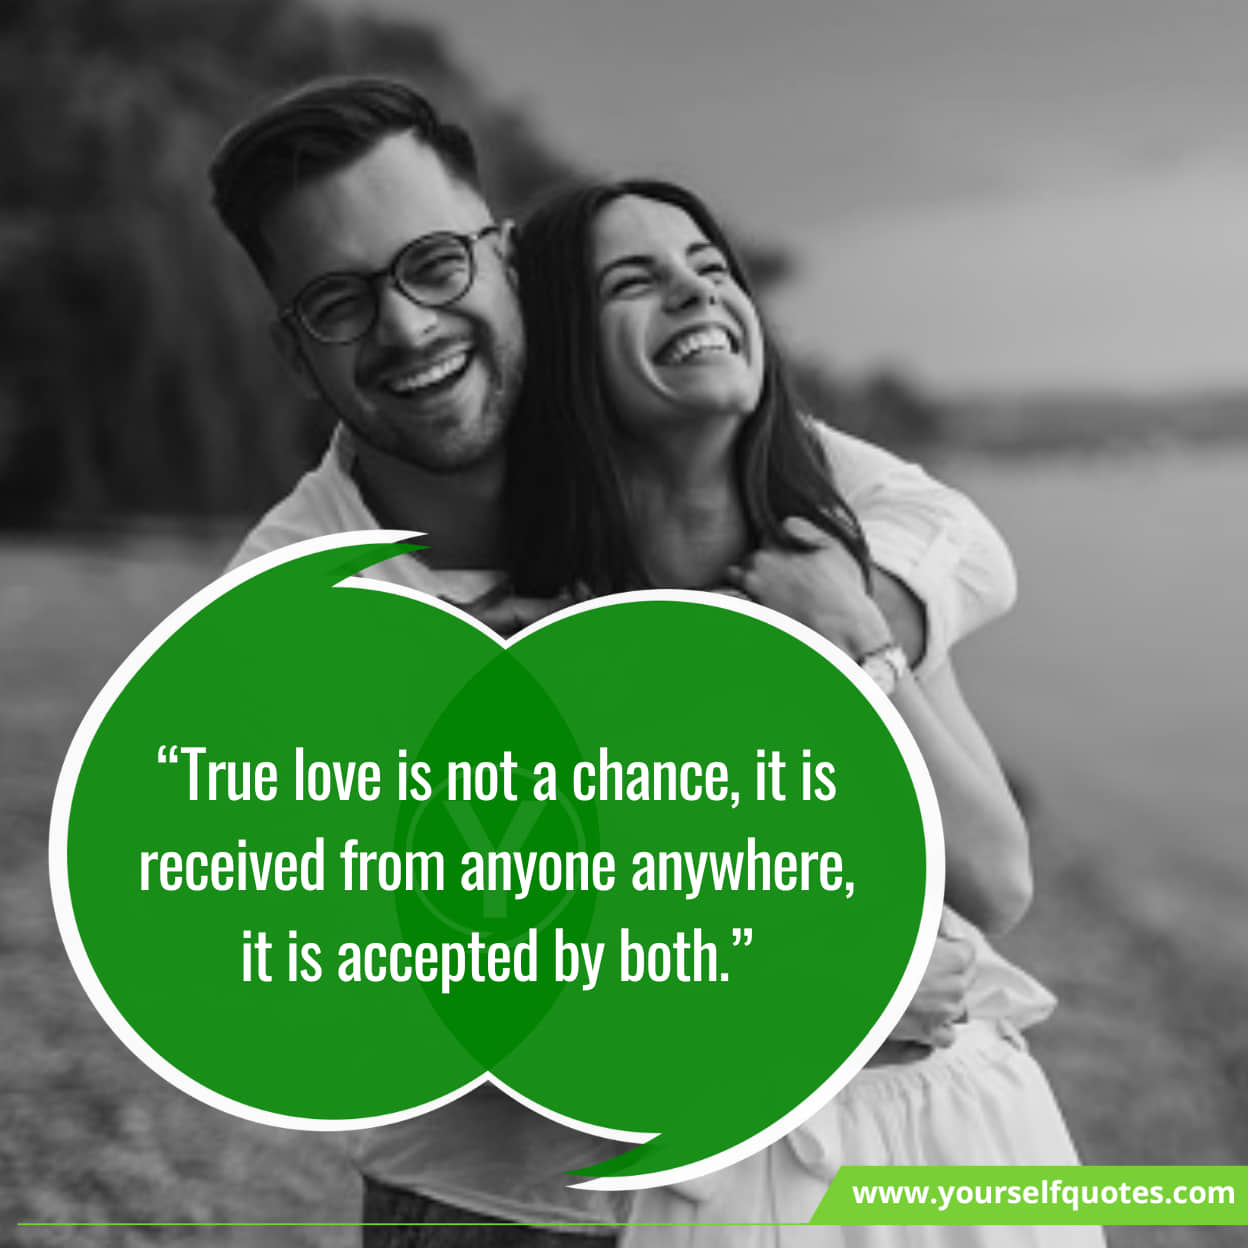 Best Famous Quotes On True Love